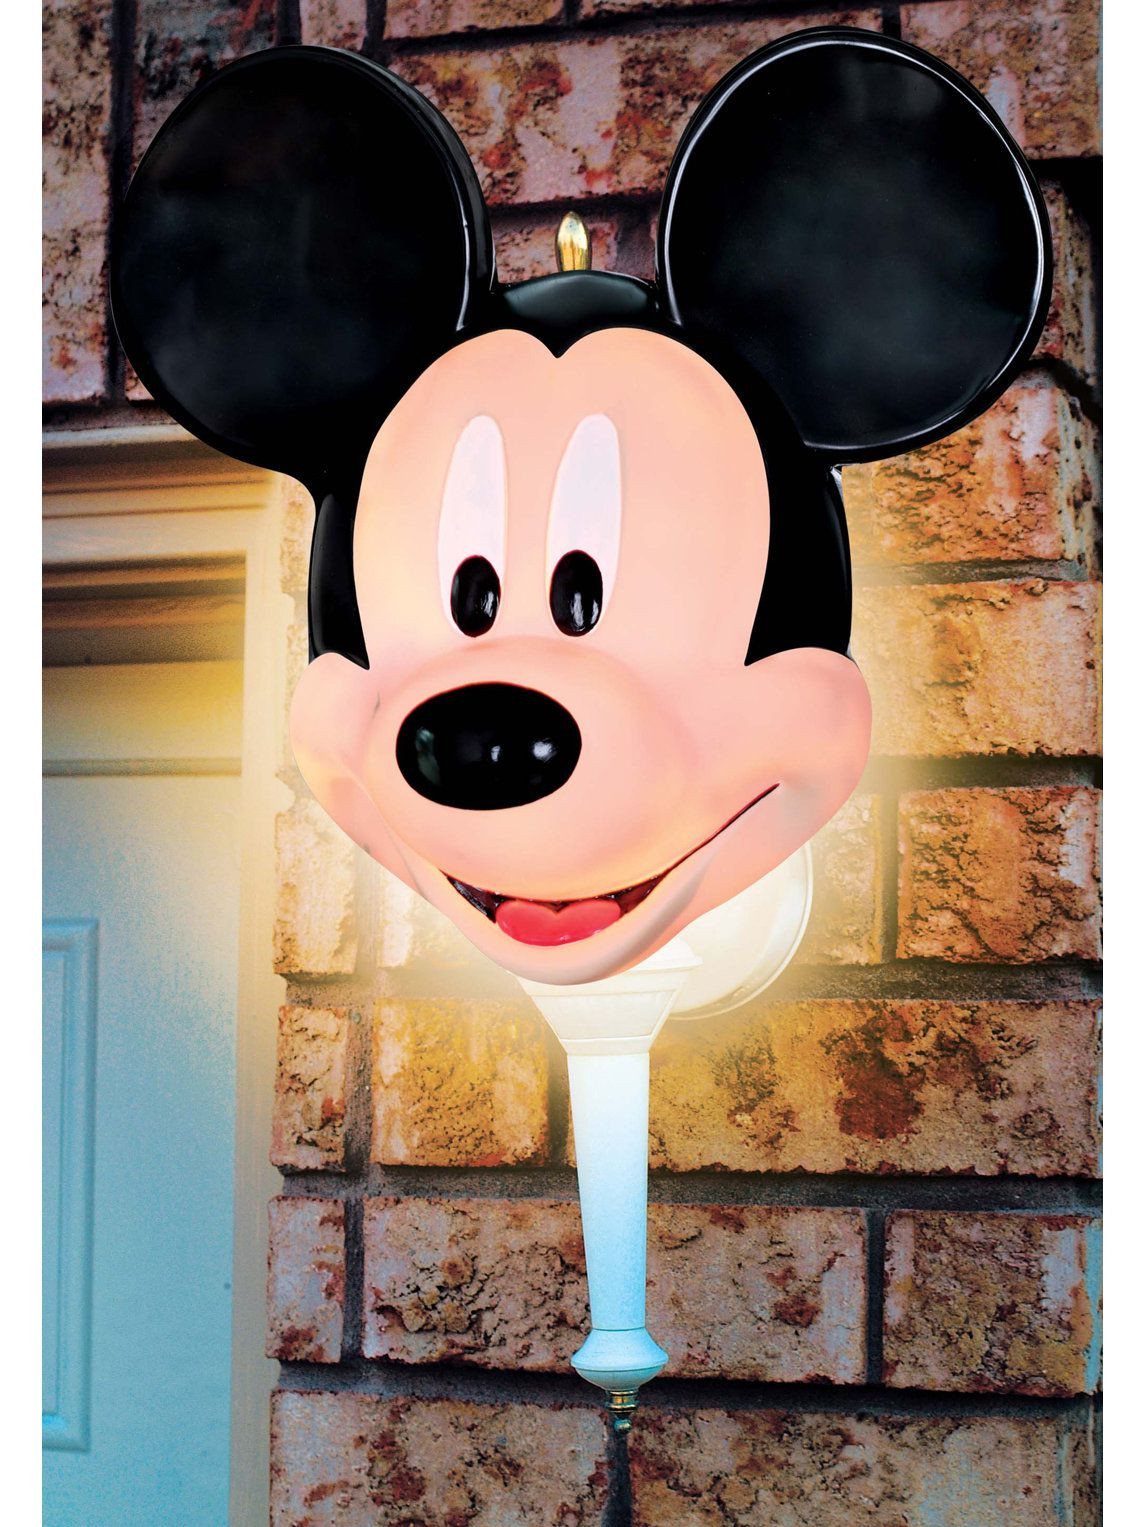 Halloween Porch Light Covers
 Mickey Mouse Porch Light Cover Halloween Decorations for